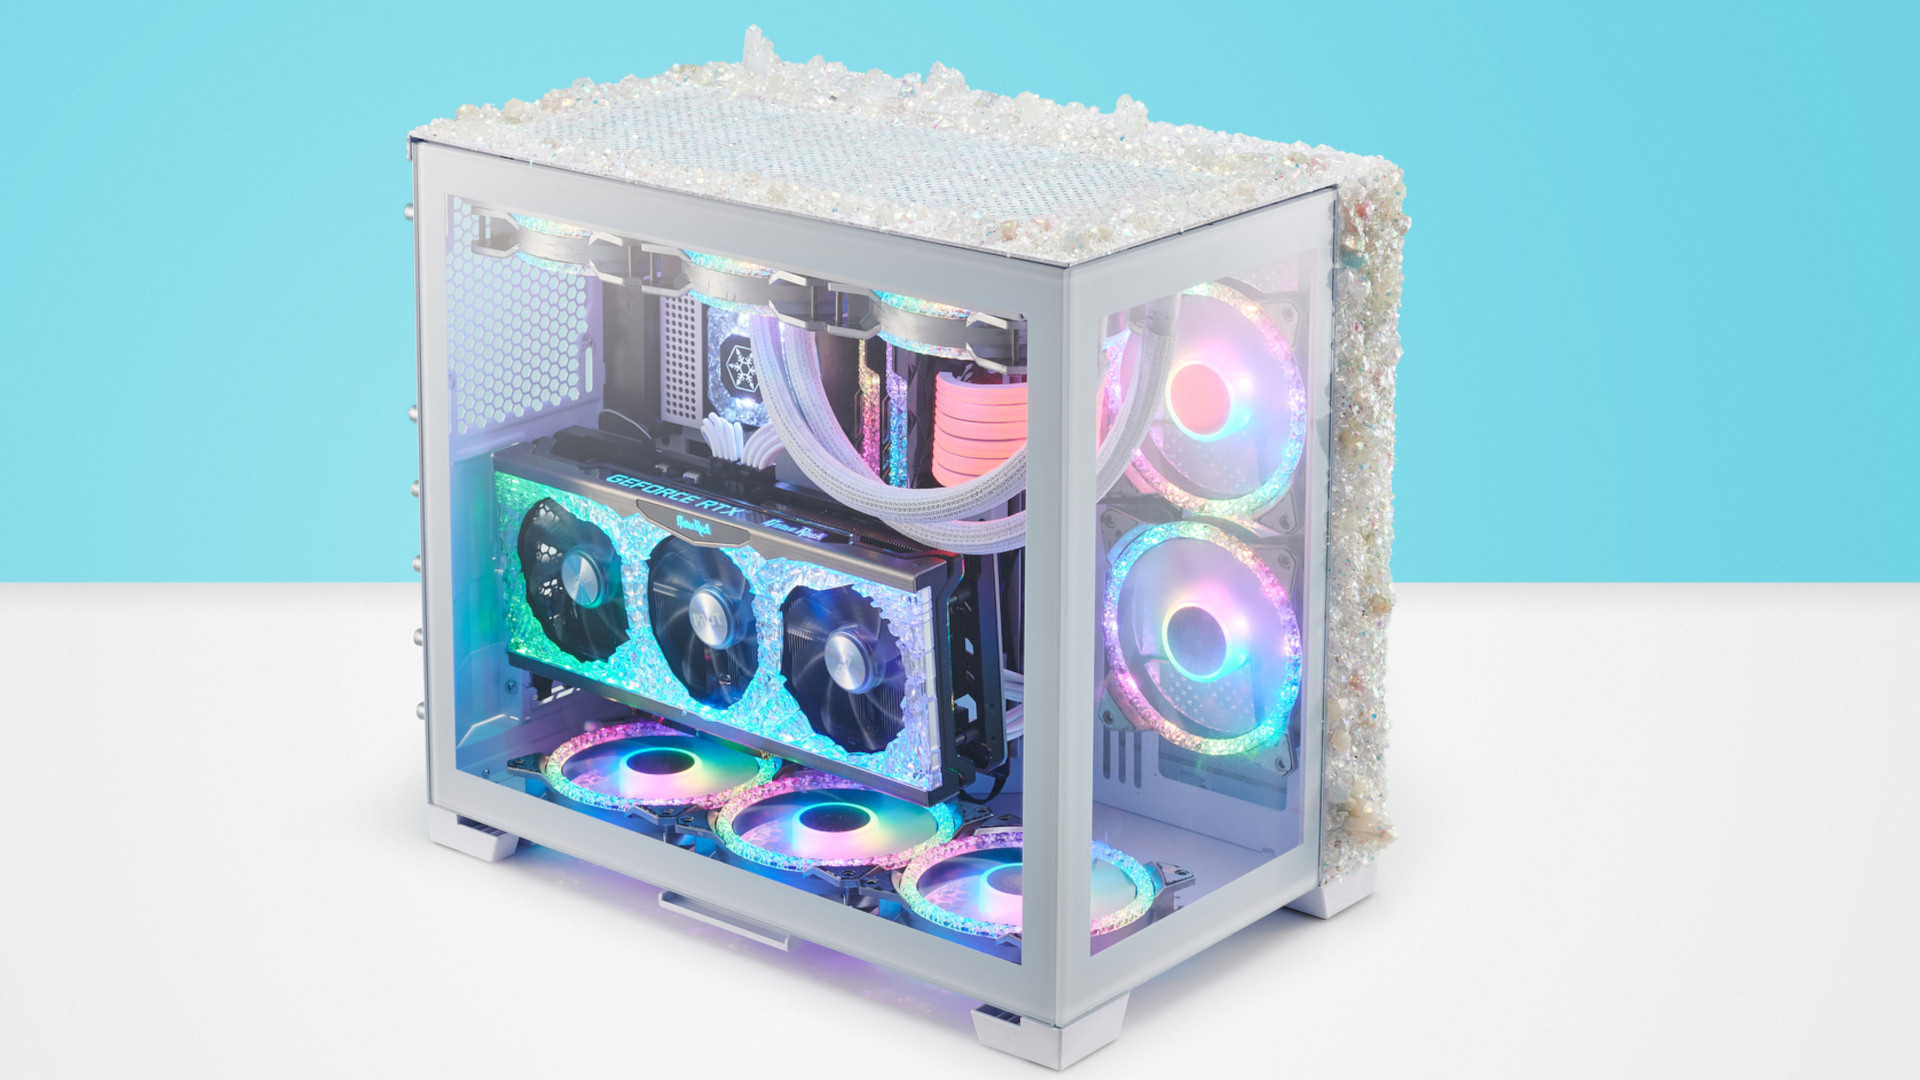 Front shot of the modded crystal PC